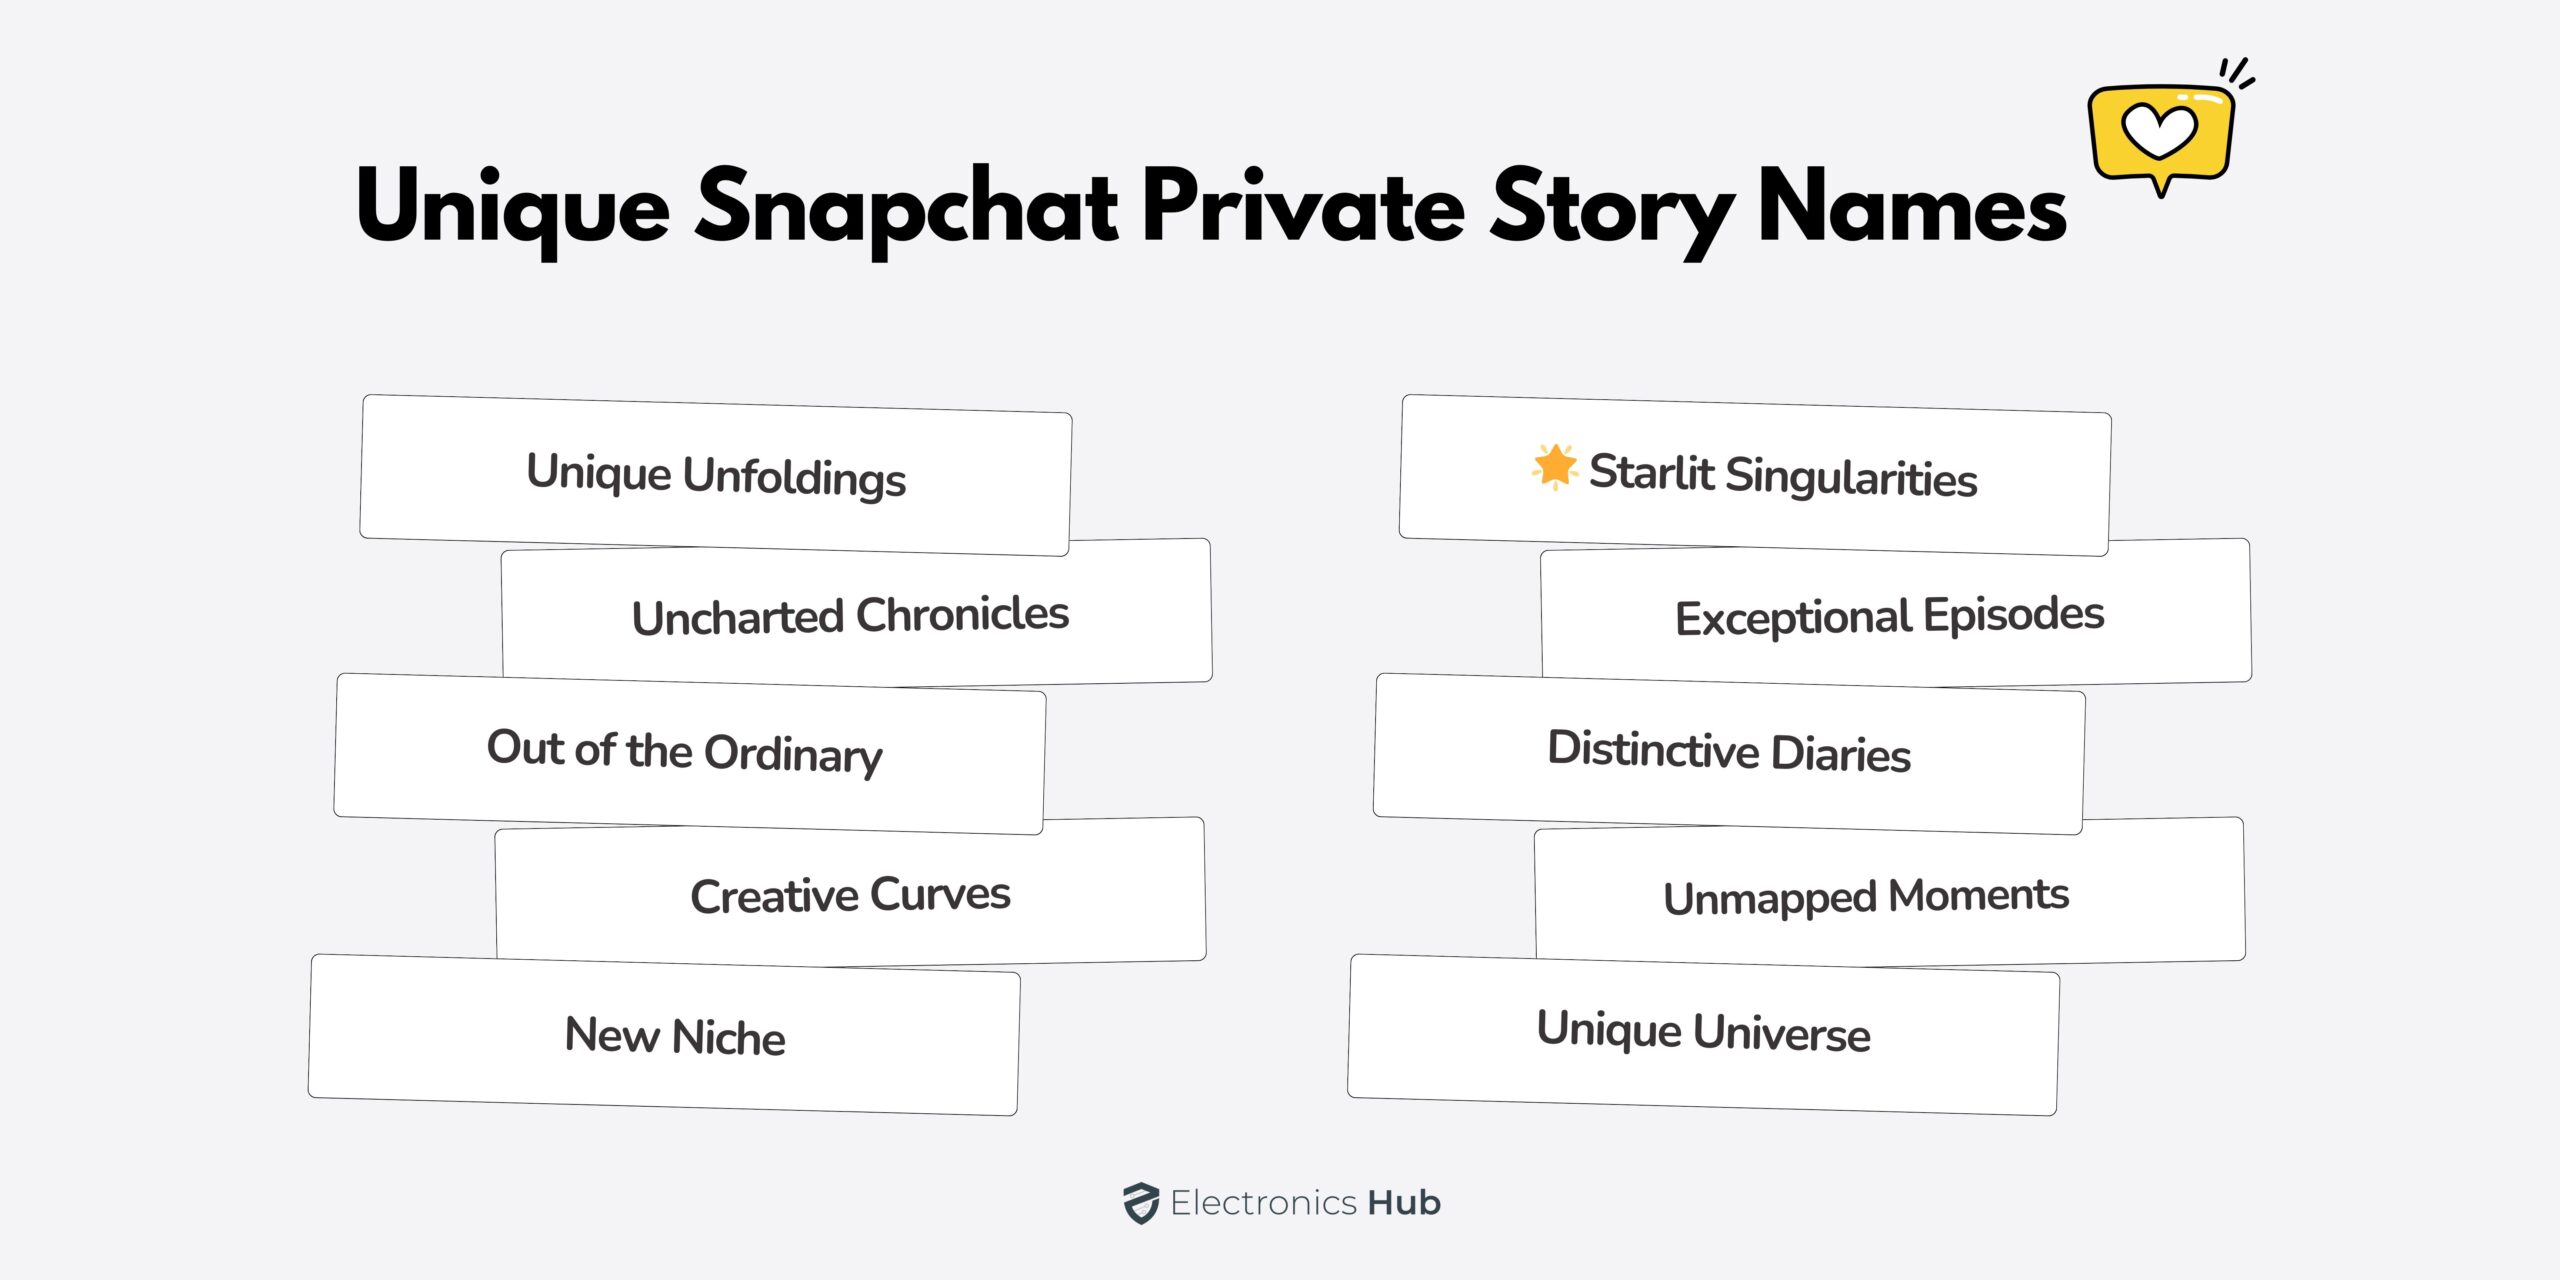 Unique Snapchat Private Story Names